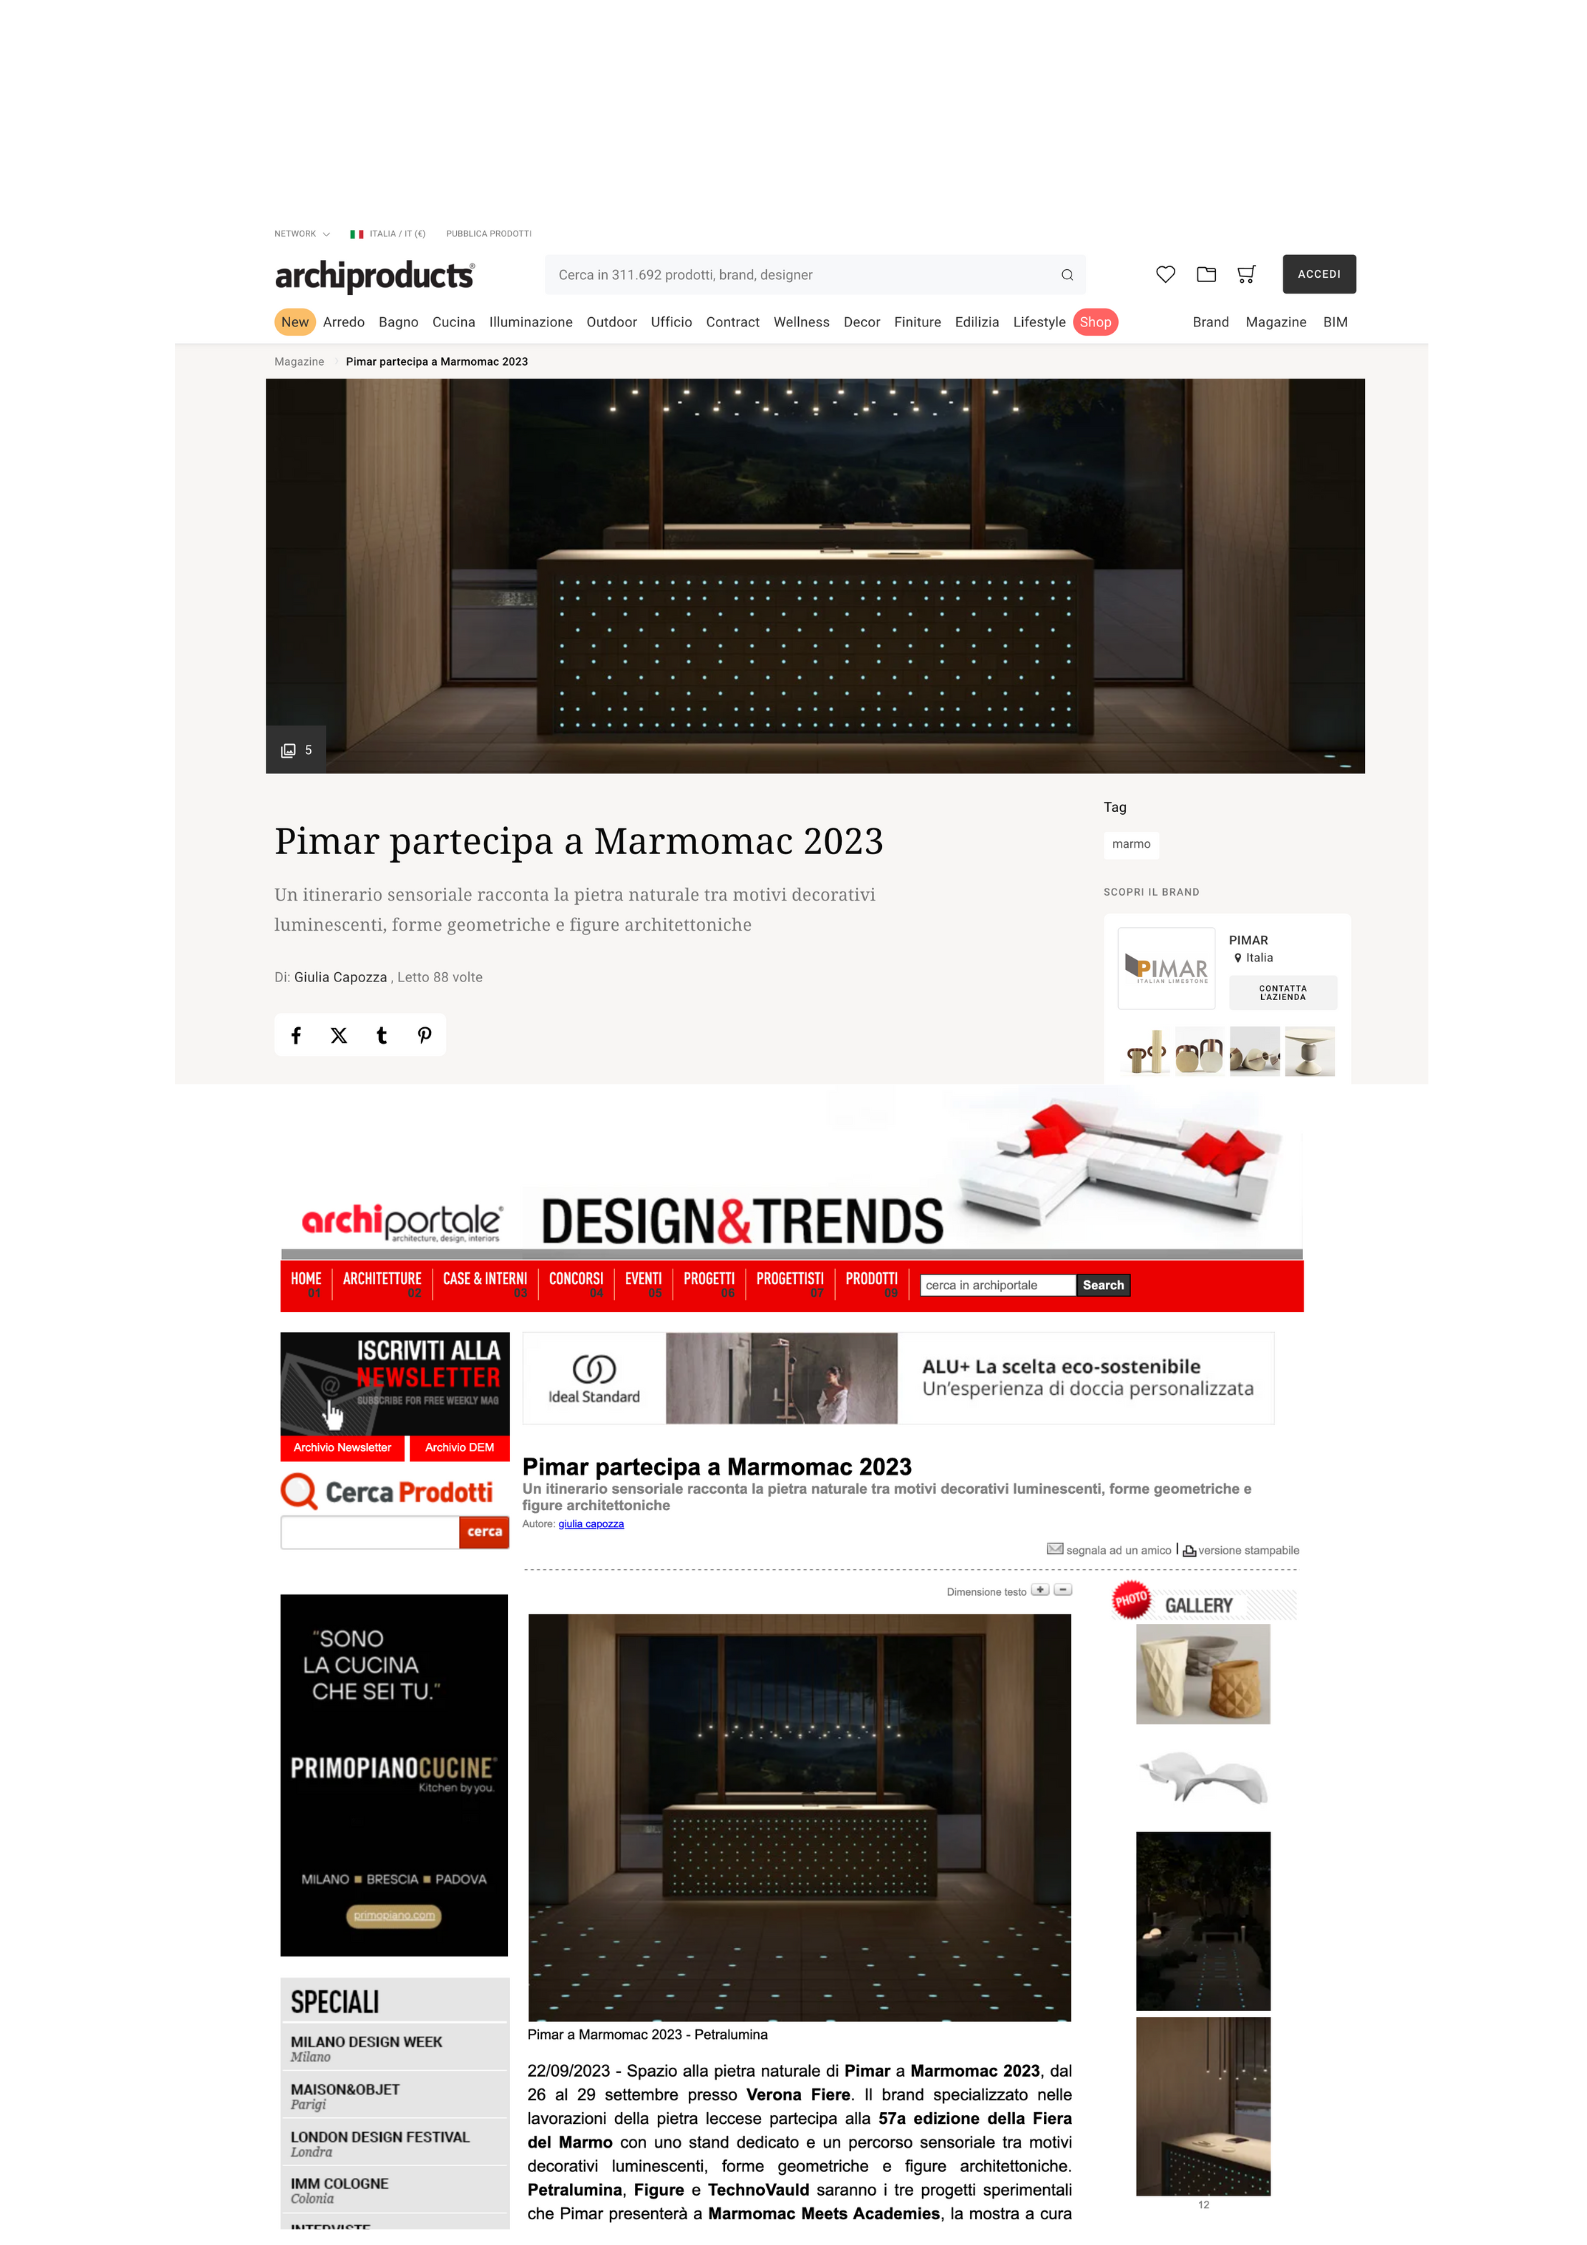 Archiproducts and Archiportale for Pimar at Marmomacc 2023